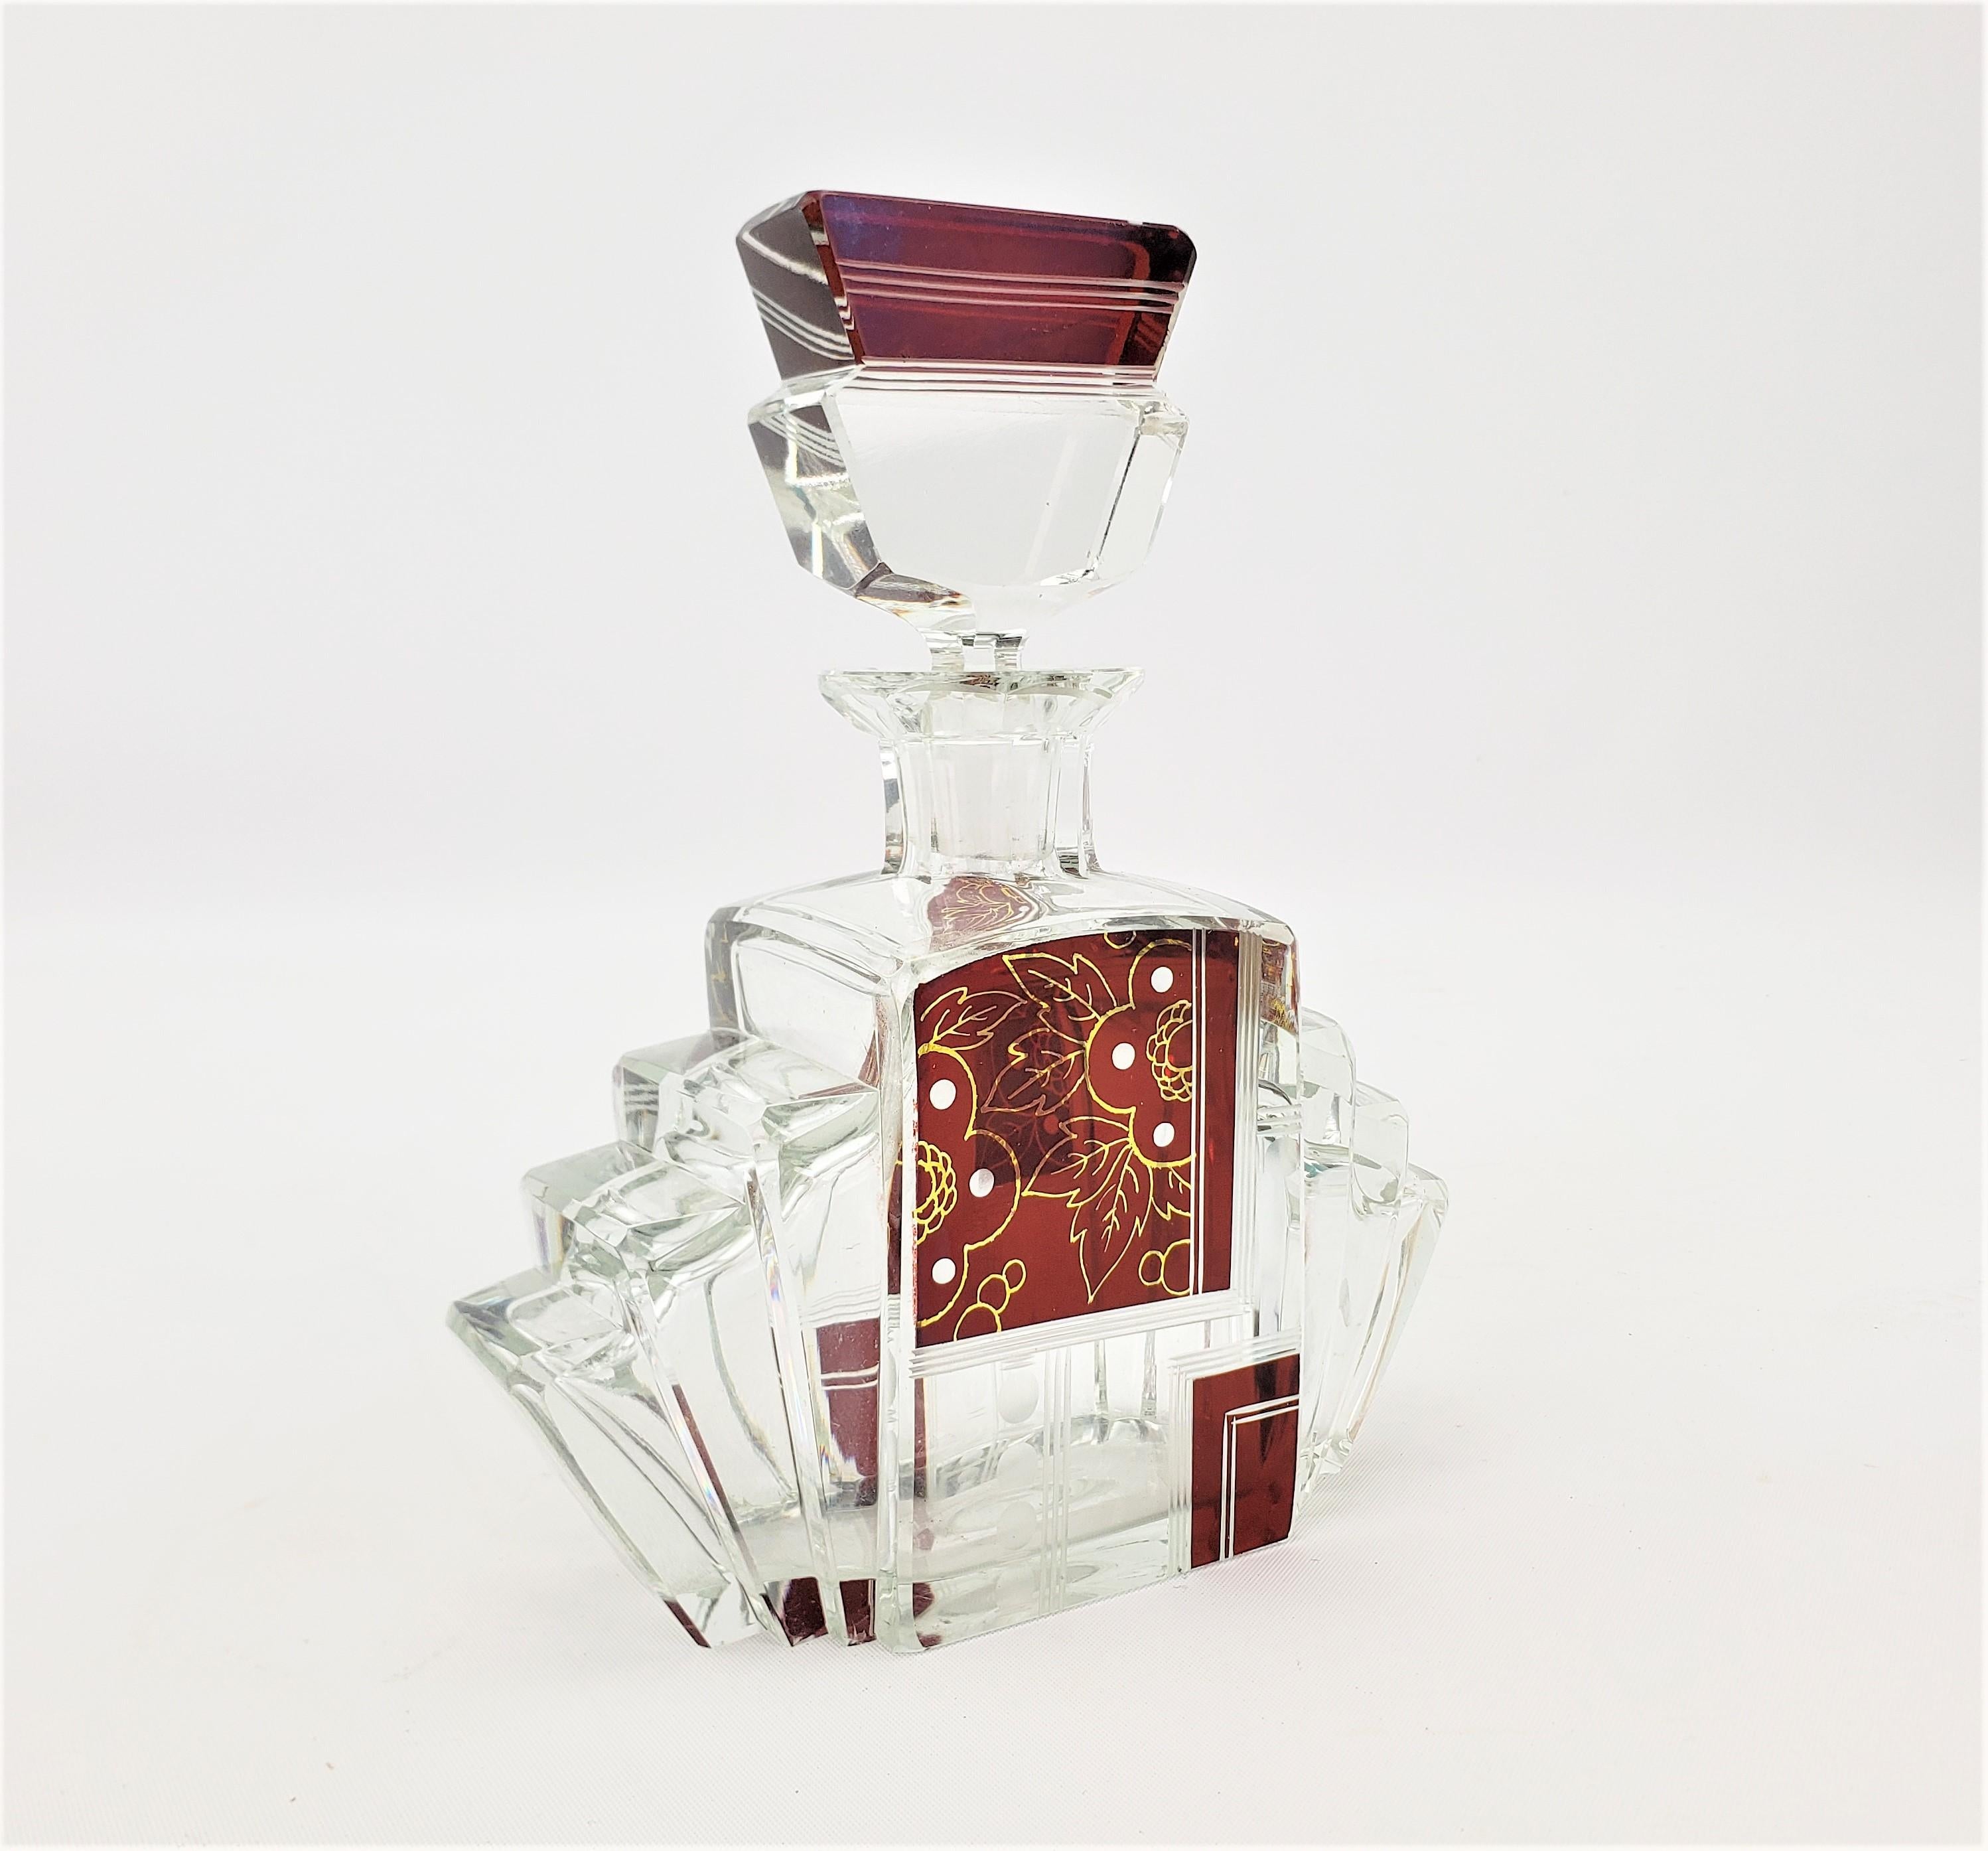 Czech Art Deco Karl Palda Styled Stepped Perfume Bottle with Ruby Red & Gold Panels